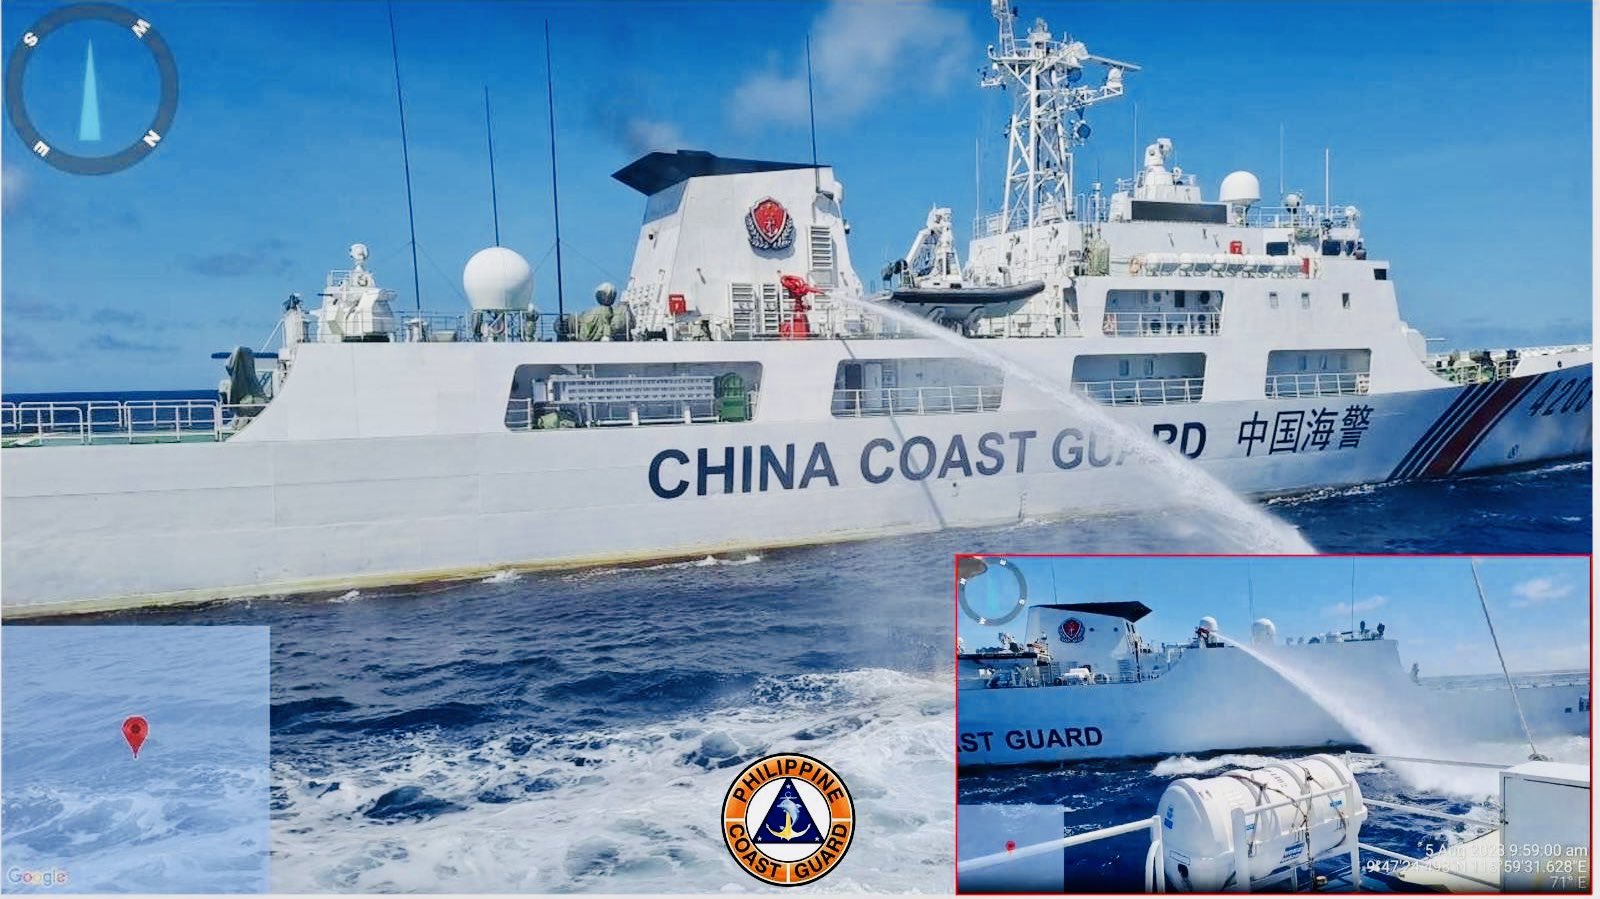 The Philippines accused the China Coast Guard Sunday of firing water cannon at its vessels in the disputed South China Sea, describing the actions as "illegal" and "dangerous.''